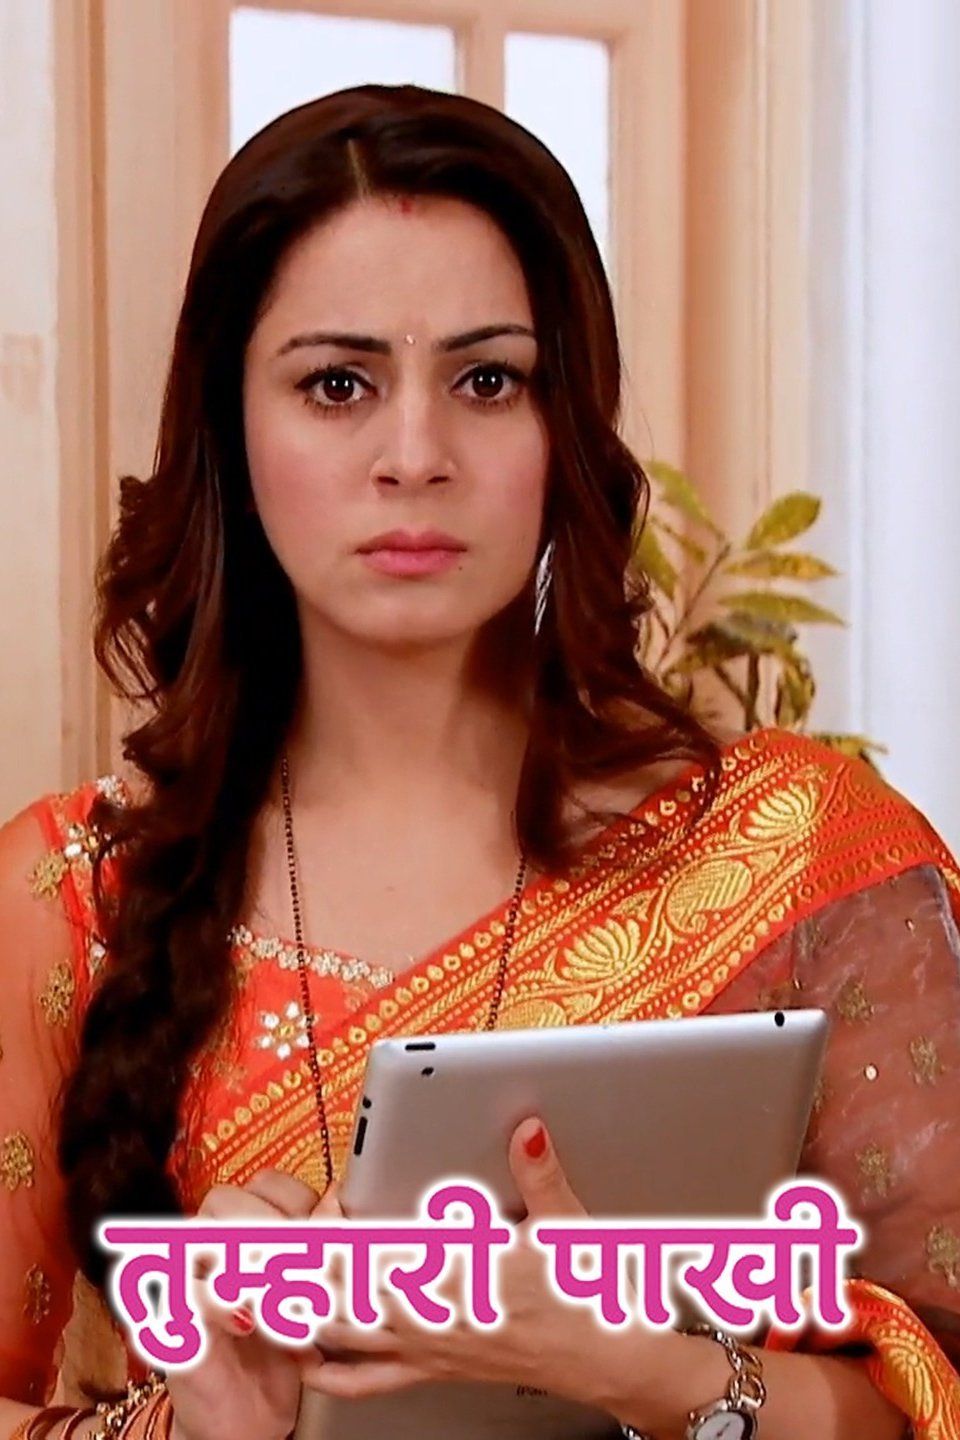 Shraddha Arya Age Boyfriend Family Biography More Starsunfolded Some lesser known facts about meenakshi arya. shraddha arya age boyfriend family